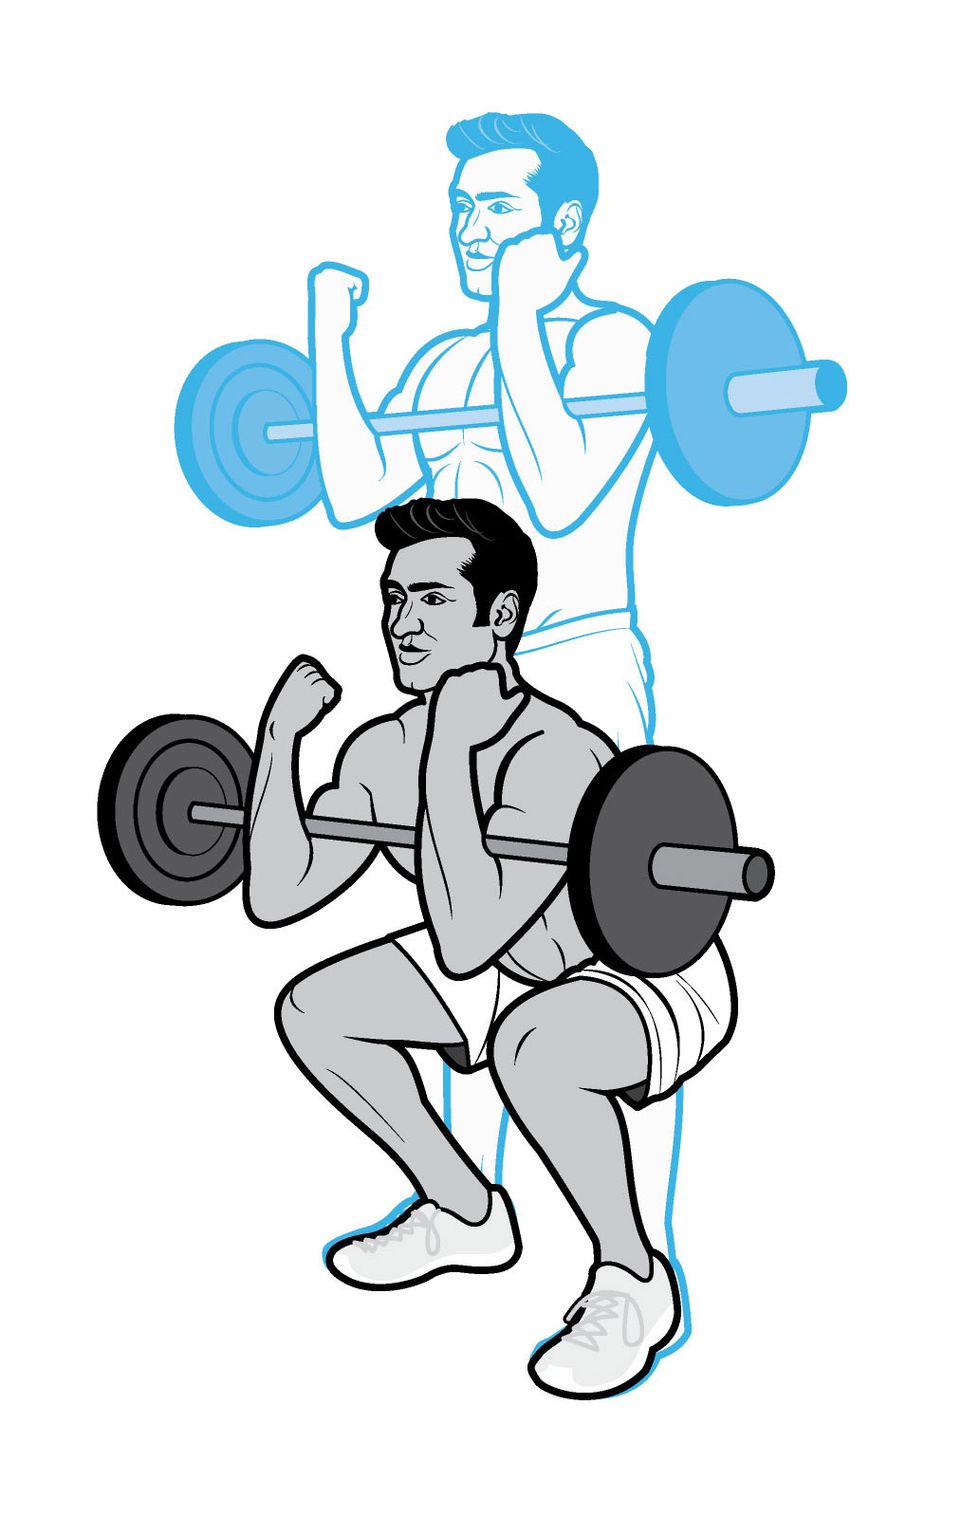 Weights, Weightlifting, Exercise equipment, Dumbbell, Barbell, Physical fitness, Arm, Cartoon, Bodybuilding, Overhead press, 